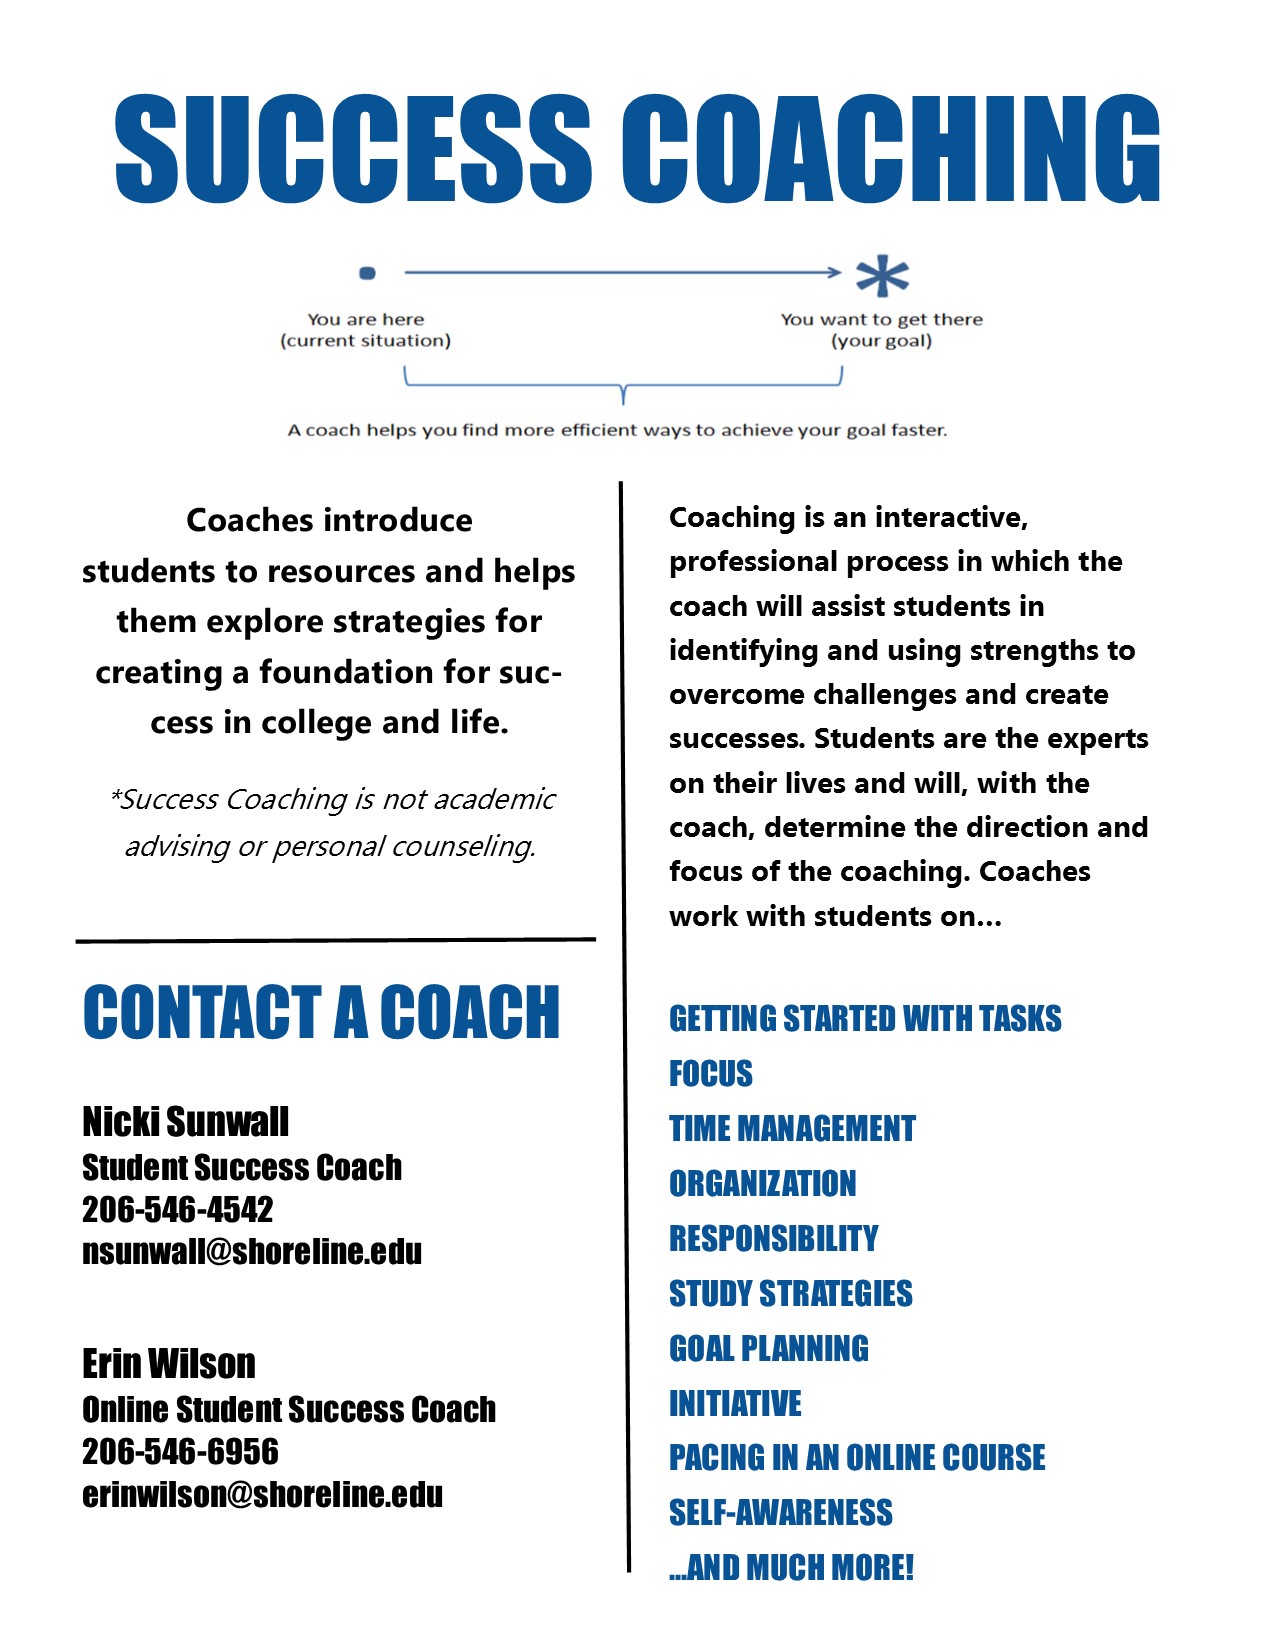 Success Coaching available to all students FREE Shoreline Today